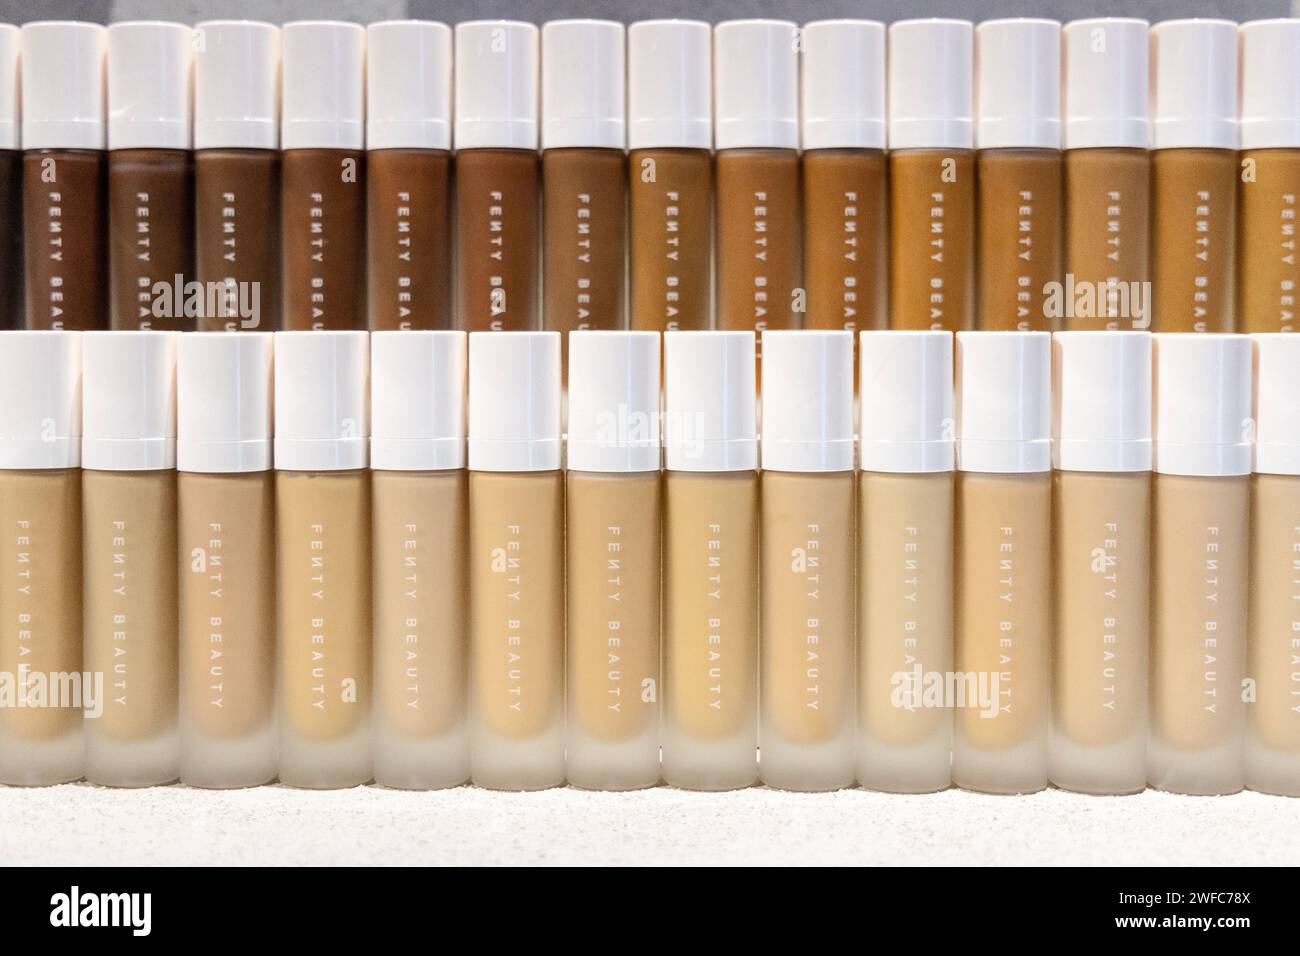 Wide range of shades of Rihanna's Fenty Beauty foundations to match a wide variety of skin tones, The Cult of Beauty exhibition, Wellcome Collection, Stock Photo